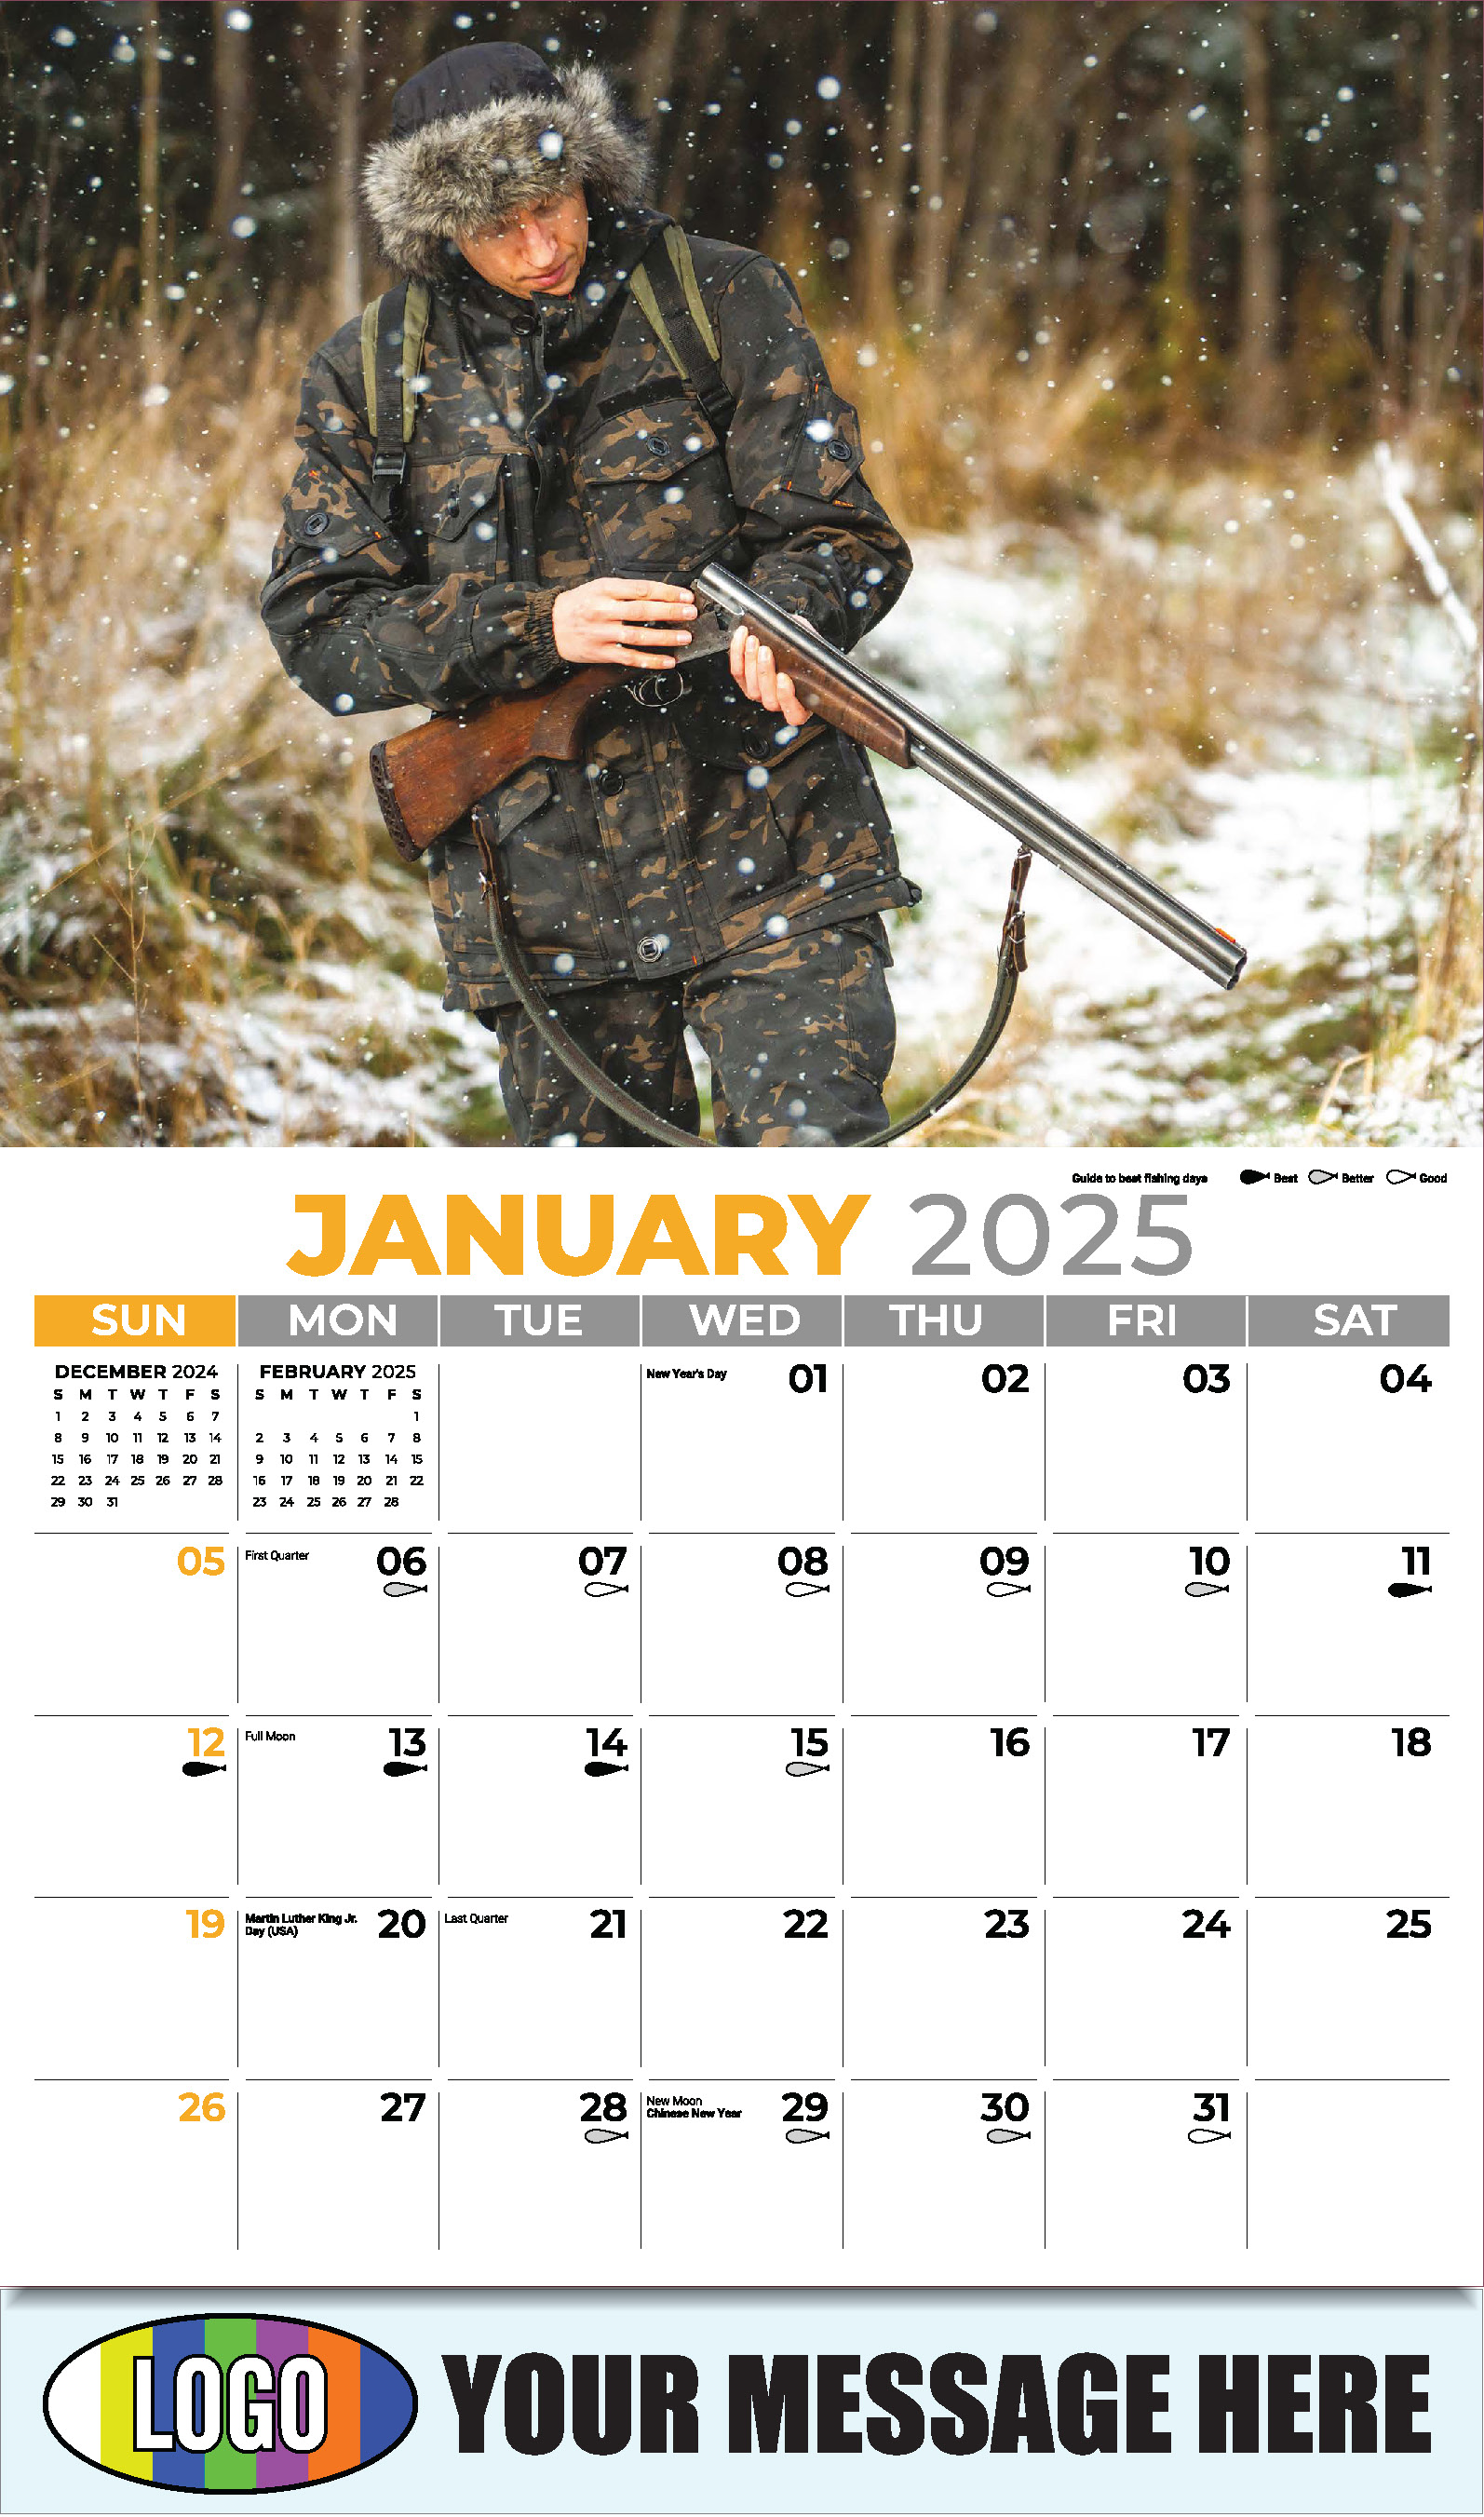 https://www.promocalendarsdirect.com/images/content/calendar/2025/popup/2025_calendar-fishing-and-hunting_0183_02.jpg